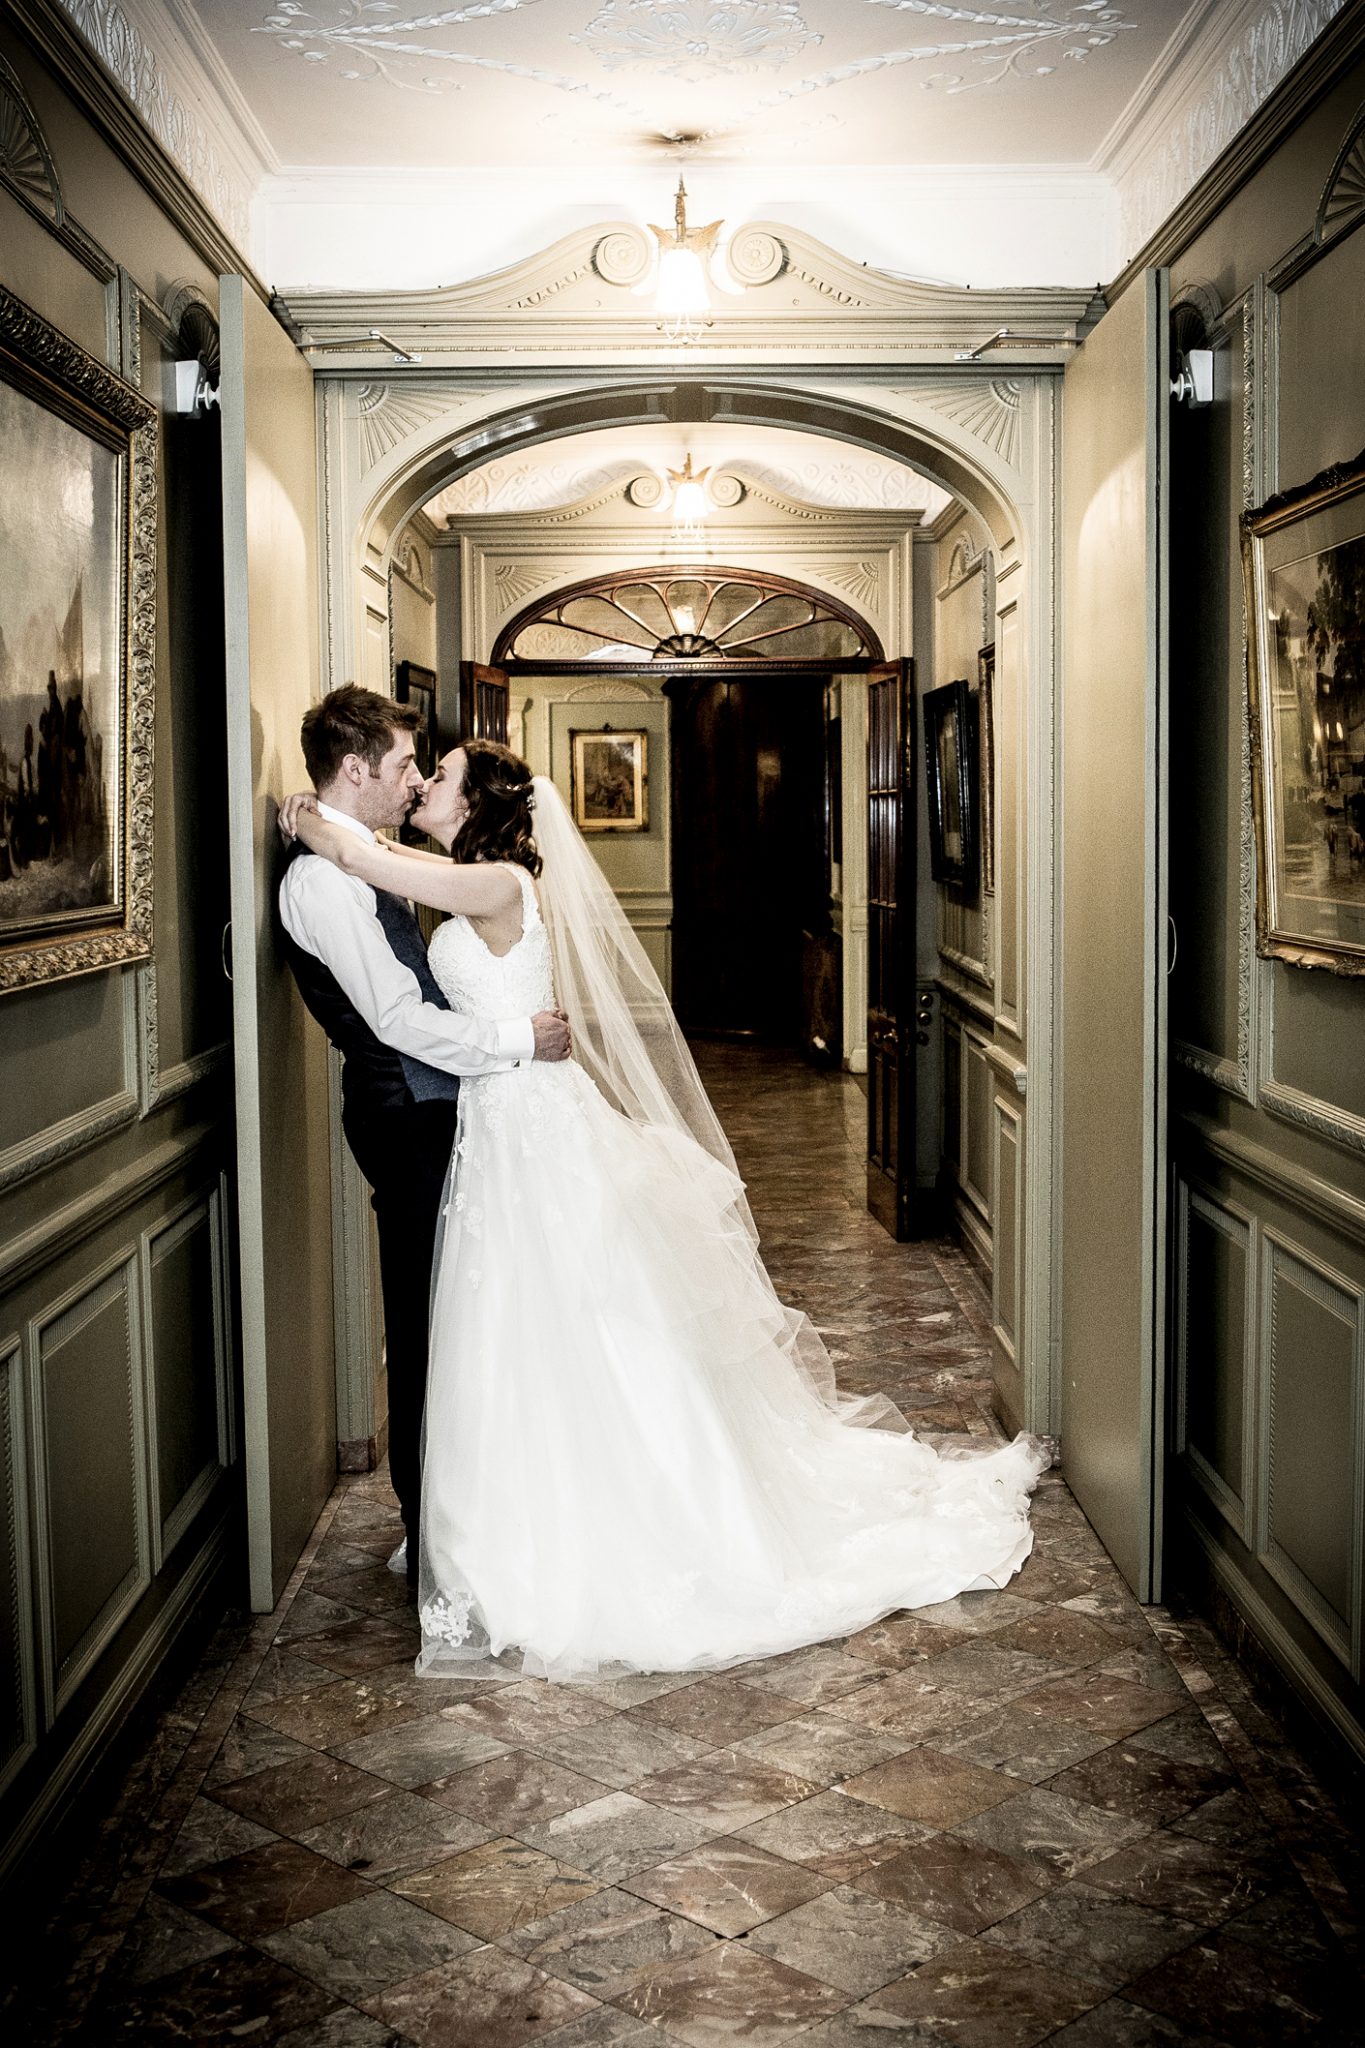 the-groom-and-bride-after-the-wedding-breakfast-at-thornton-manor